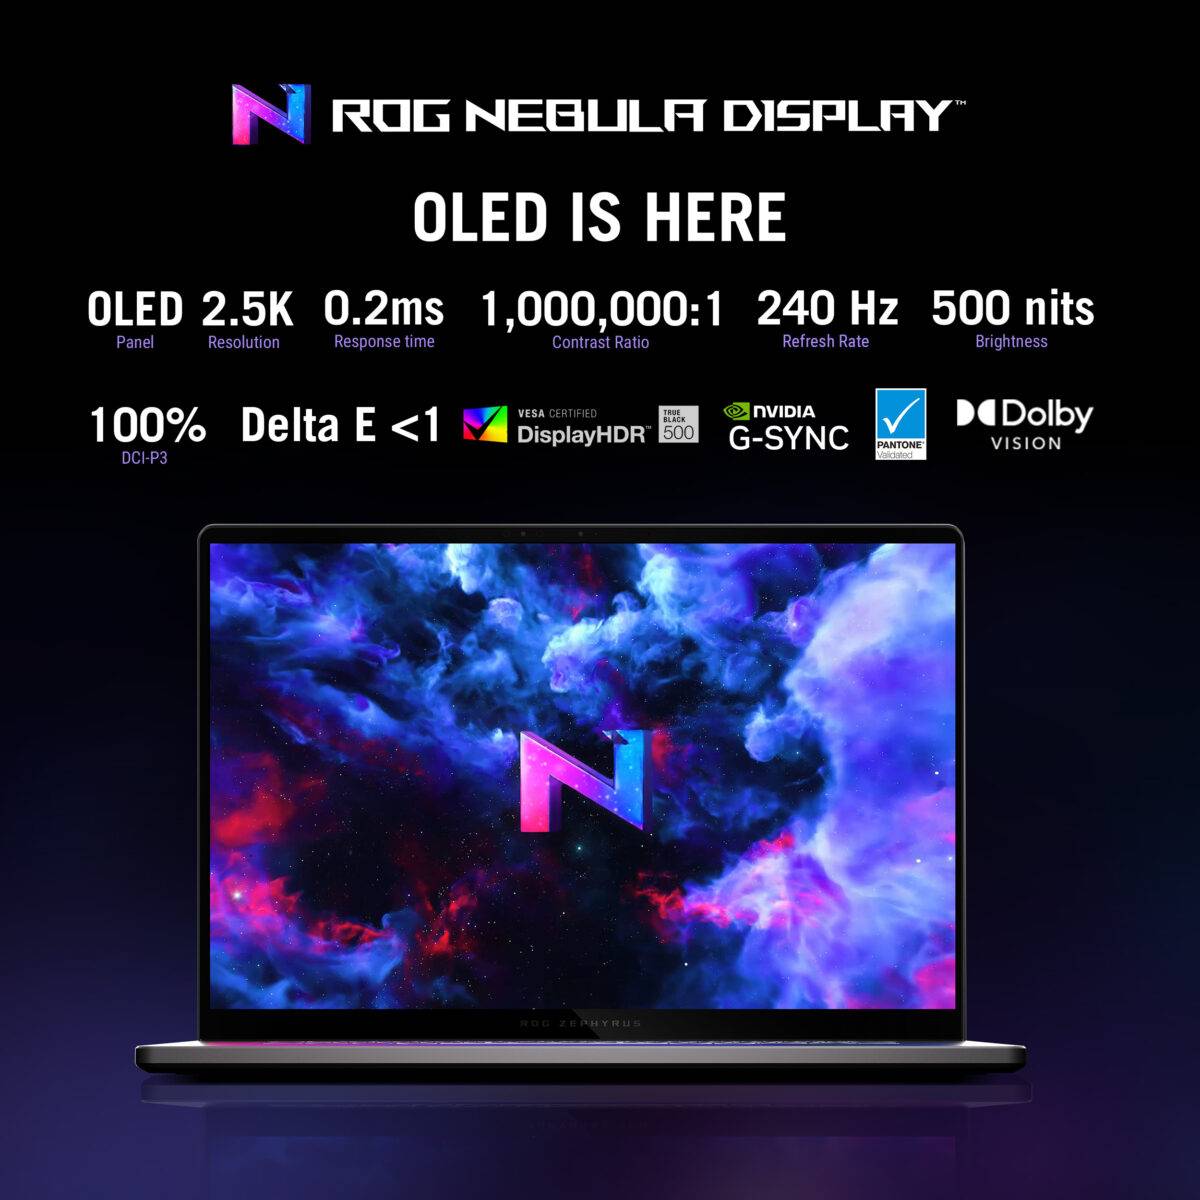 For the first time on an ROG laptop, enjoy the ultra-fast response times and incredible contrast ratios that are only possible with OLED technology. This panel also boasts a 2.5K resolution, giving it incredible pixel density on a 16-inch screen, with a 240Hz refresh rate that makes all of your games look silky smooth. With 100% coverage of the DCI-P3 color space, a delta E color accuracy of less than 1, and VESA HDR True Black 500 certification, prepare to be immersed in HDR content so lifelike that the screen melts away. *Average tested result in MyASUS/ Armoury Crate Splendid Display P3 and sRGB color gamut: Delta E < 1, +/- 0.5, and may vary by specification. Please note that the actual performance also may vary under different test procedures, equipment and patterns.